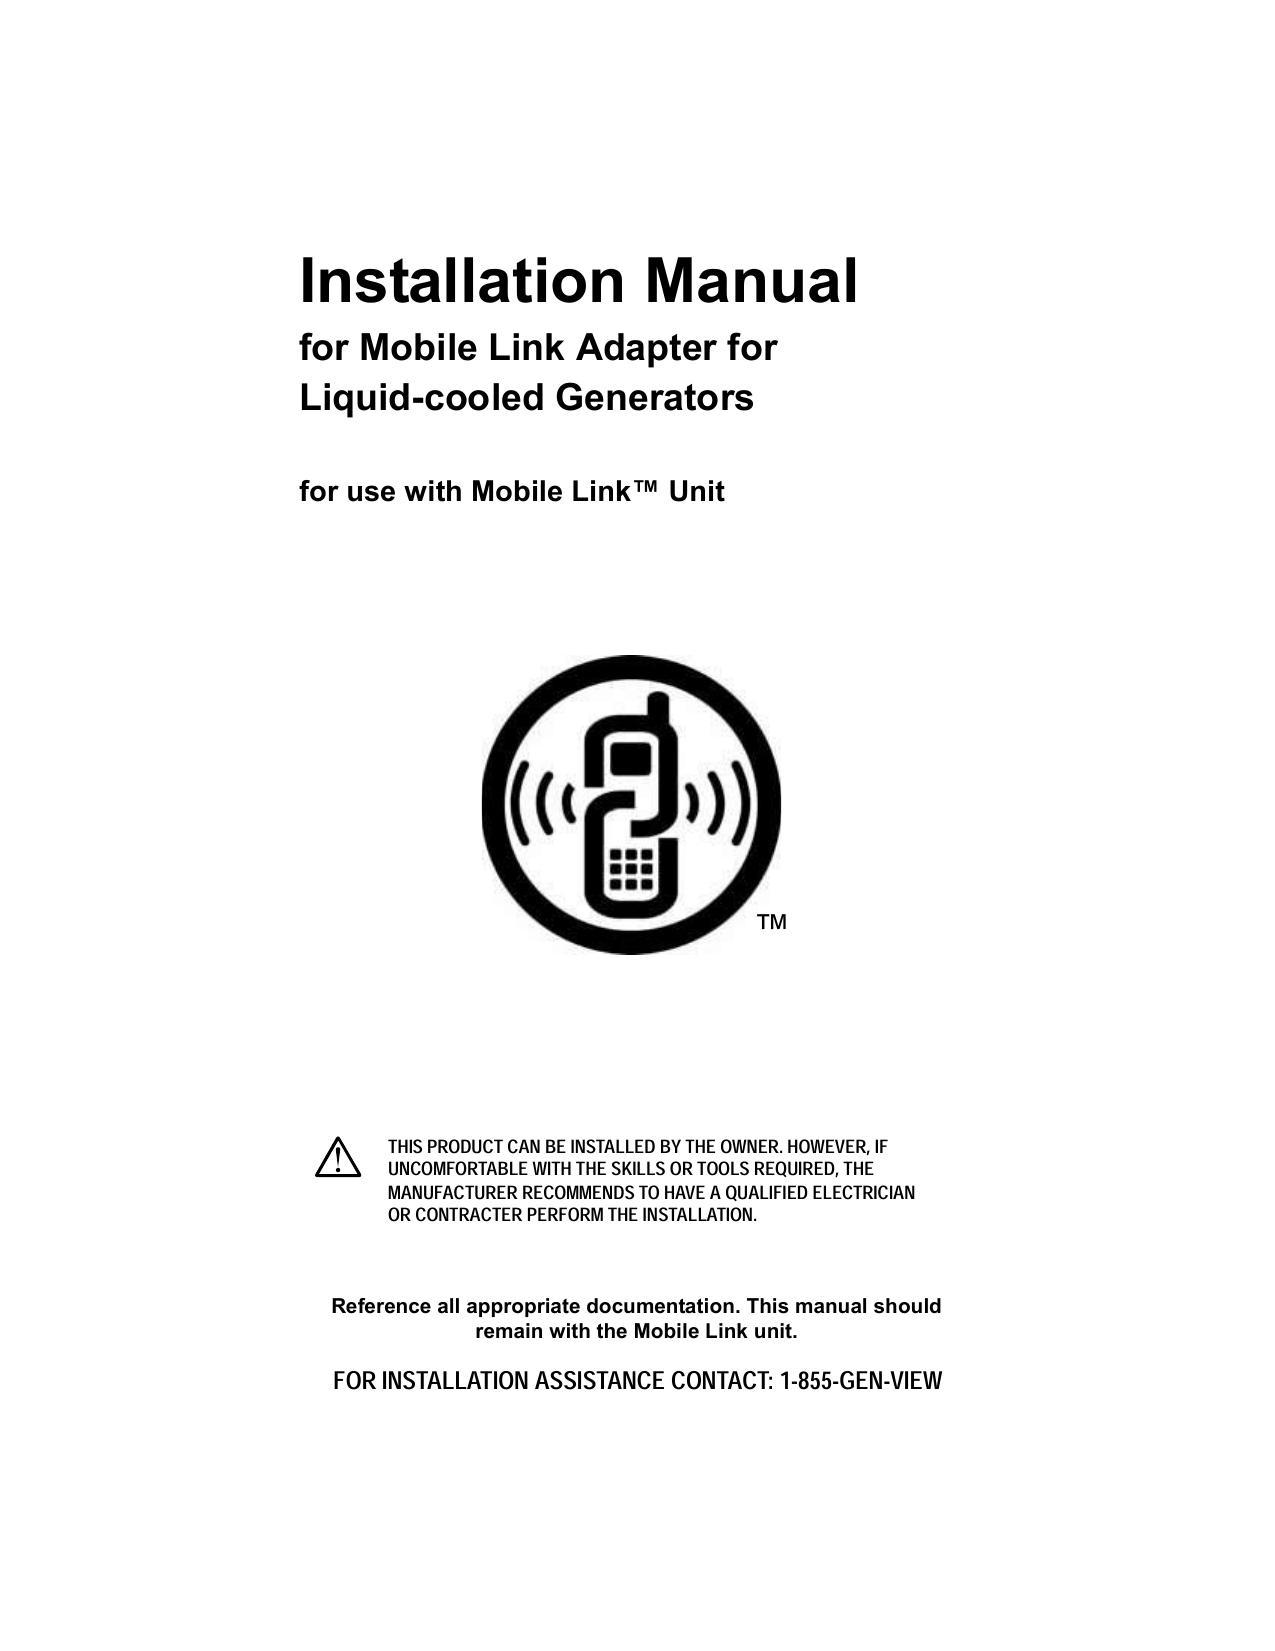 installation-manual-for-mobile-link-adapter-for-liquid-cooled-generators.pdf